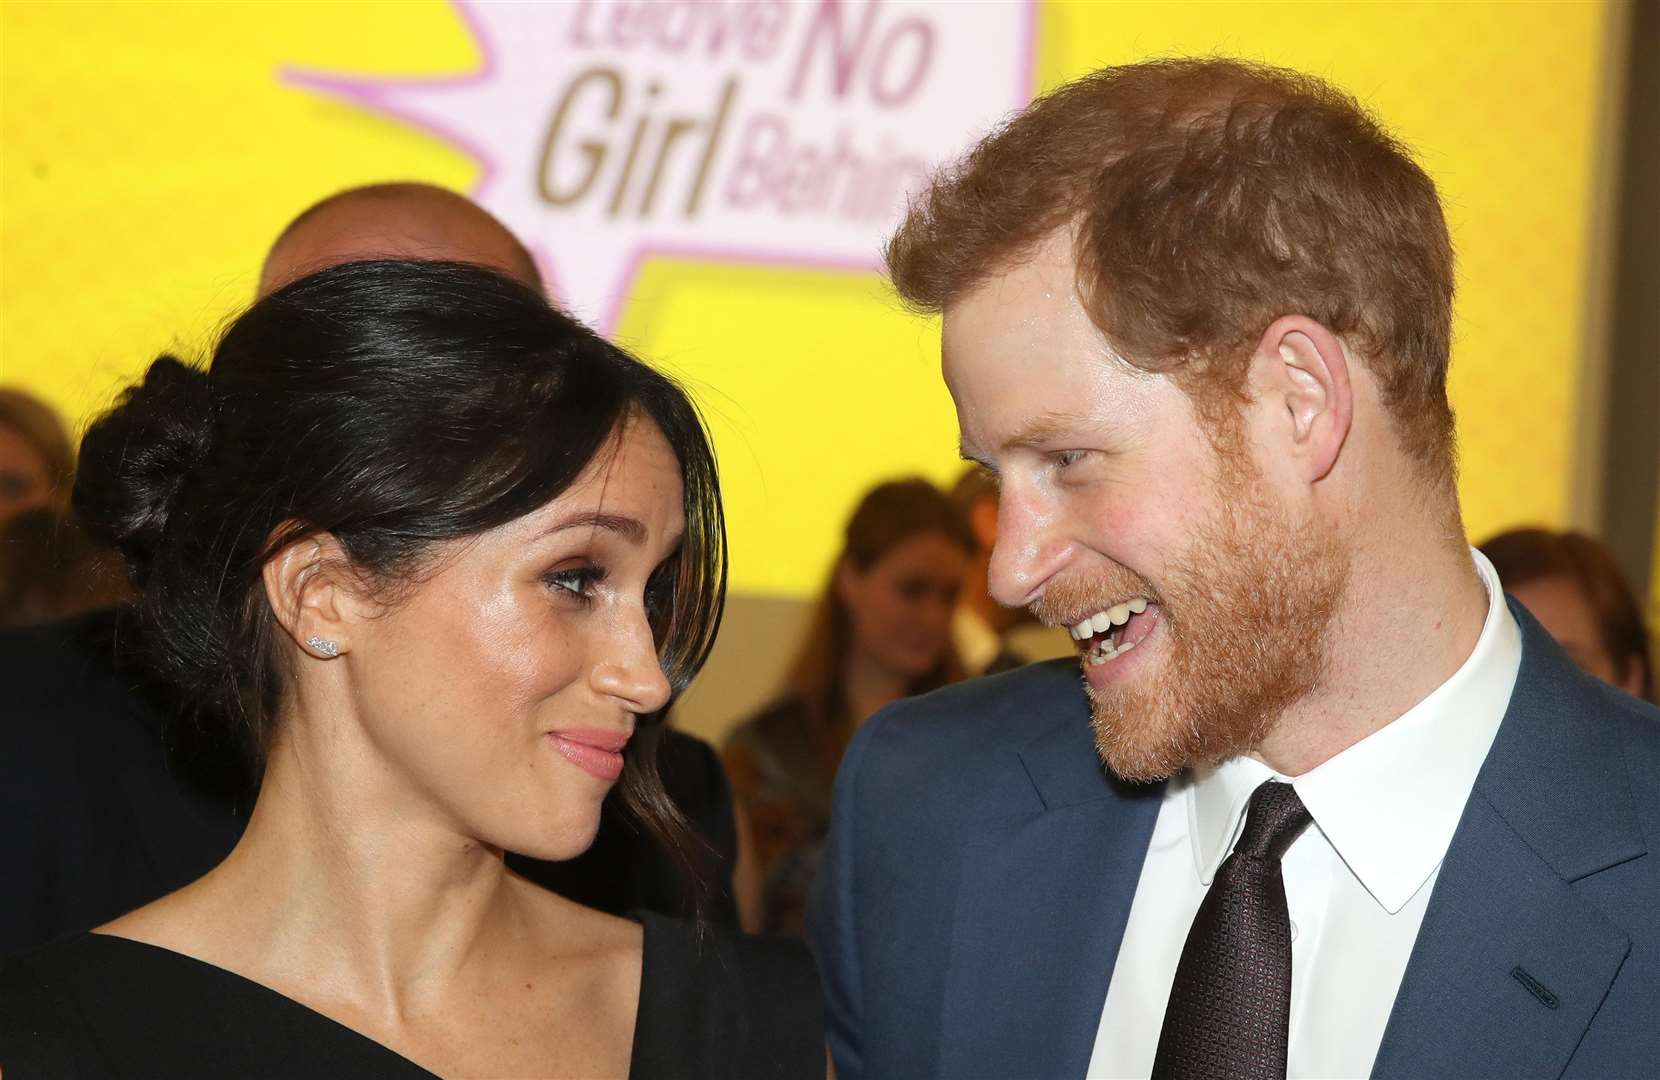 Prince Harry and Meghan Markle attend a women's empowerment reception in London. Picture: Chris Jackson/PA Wire